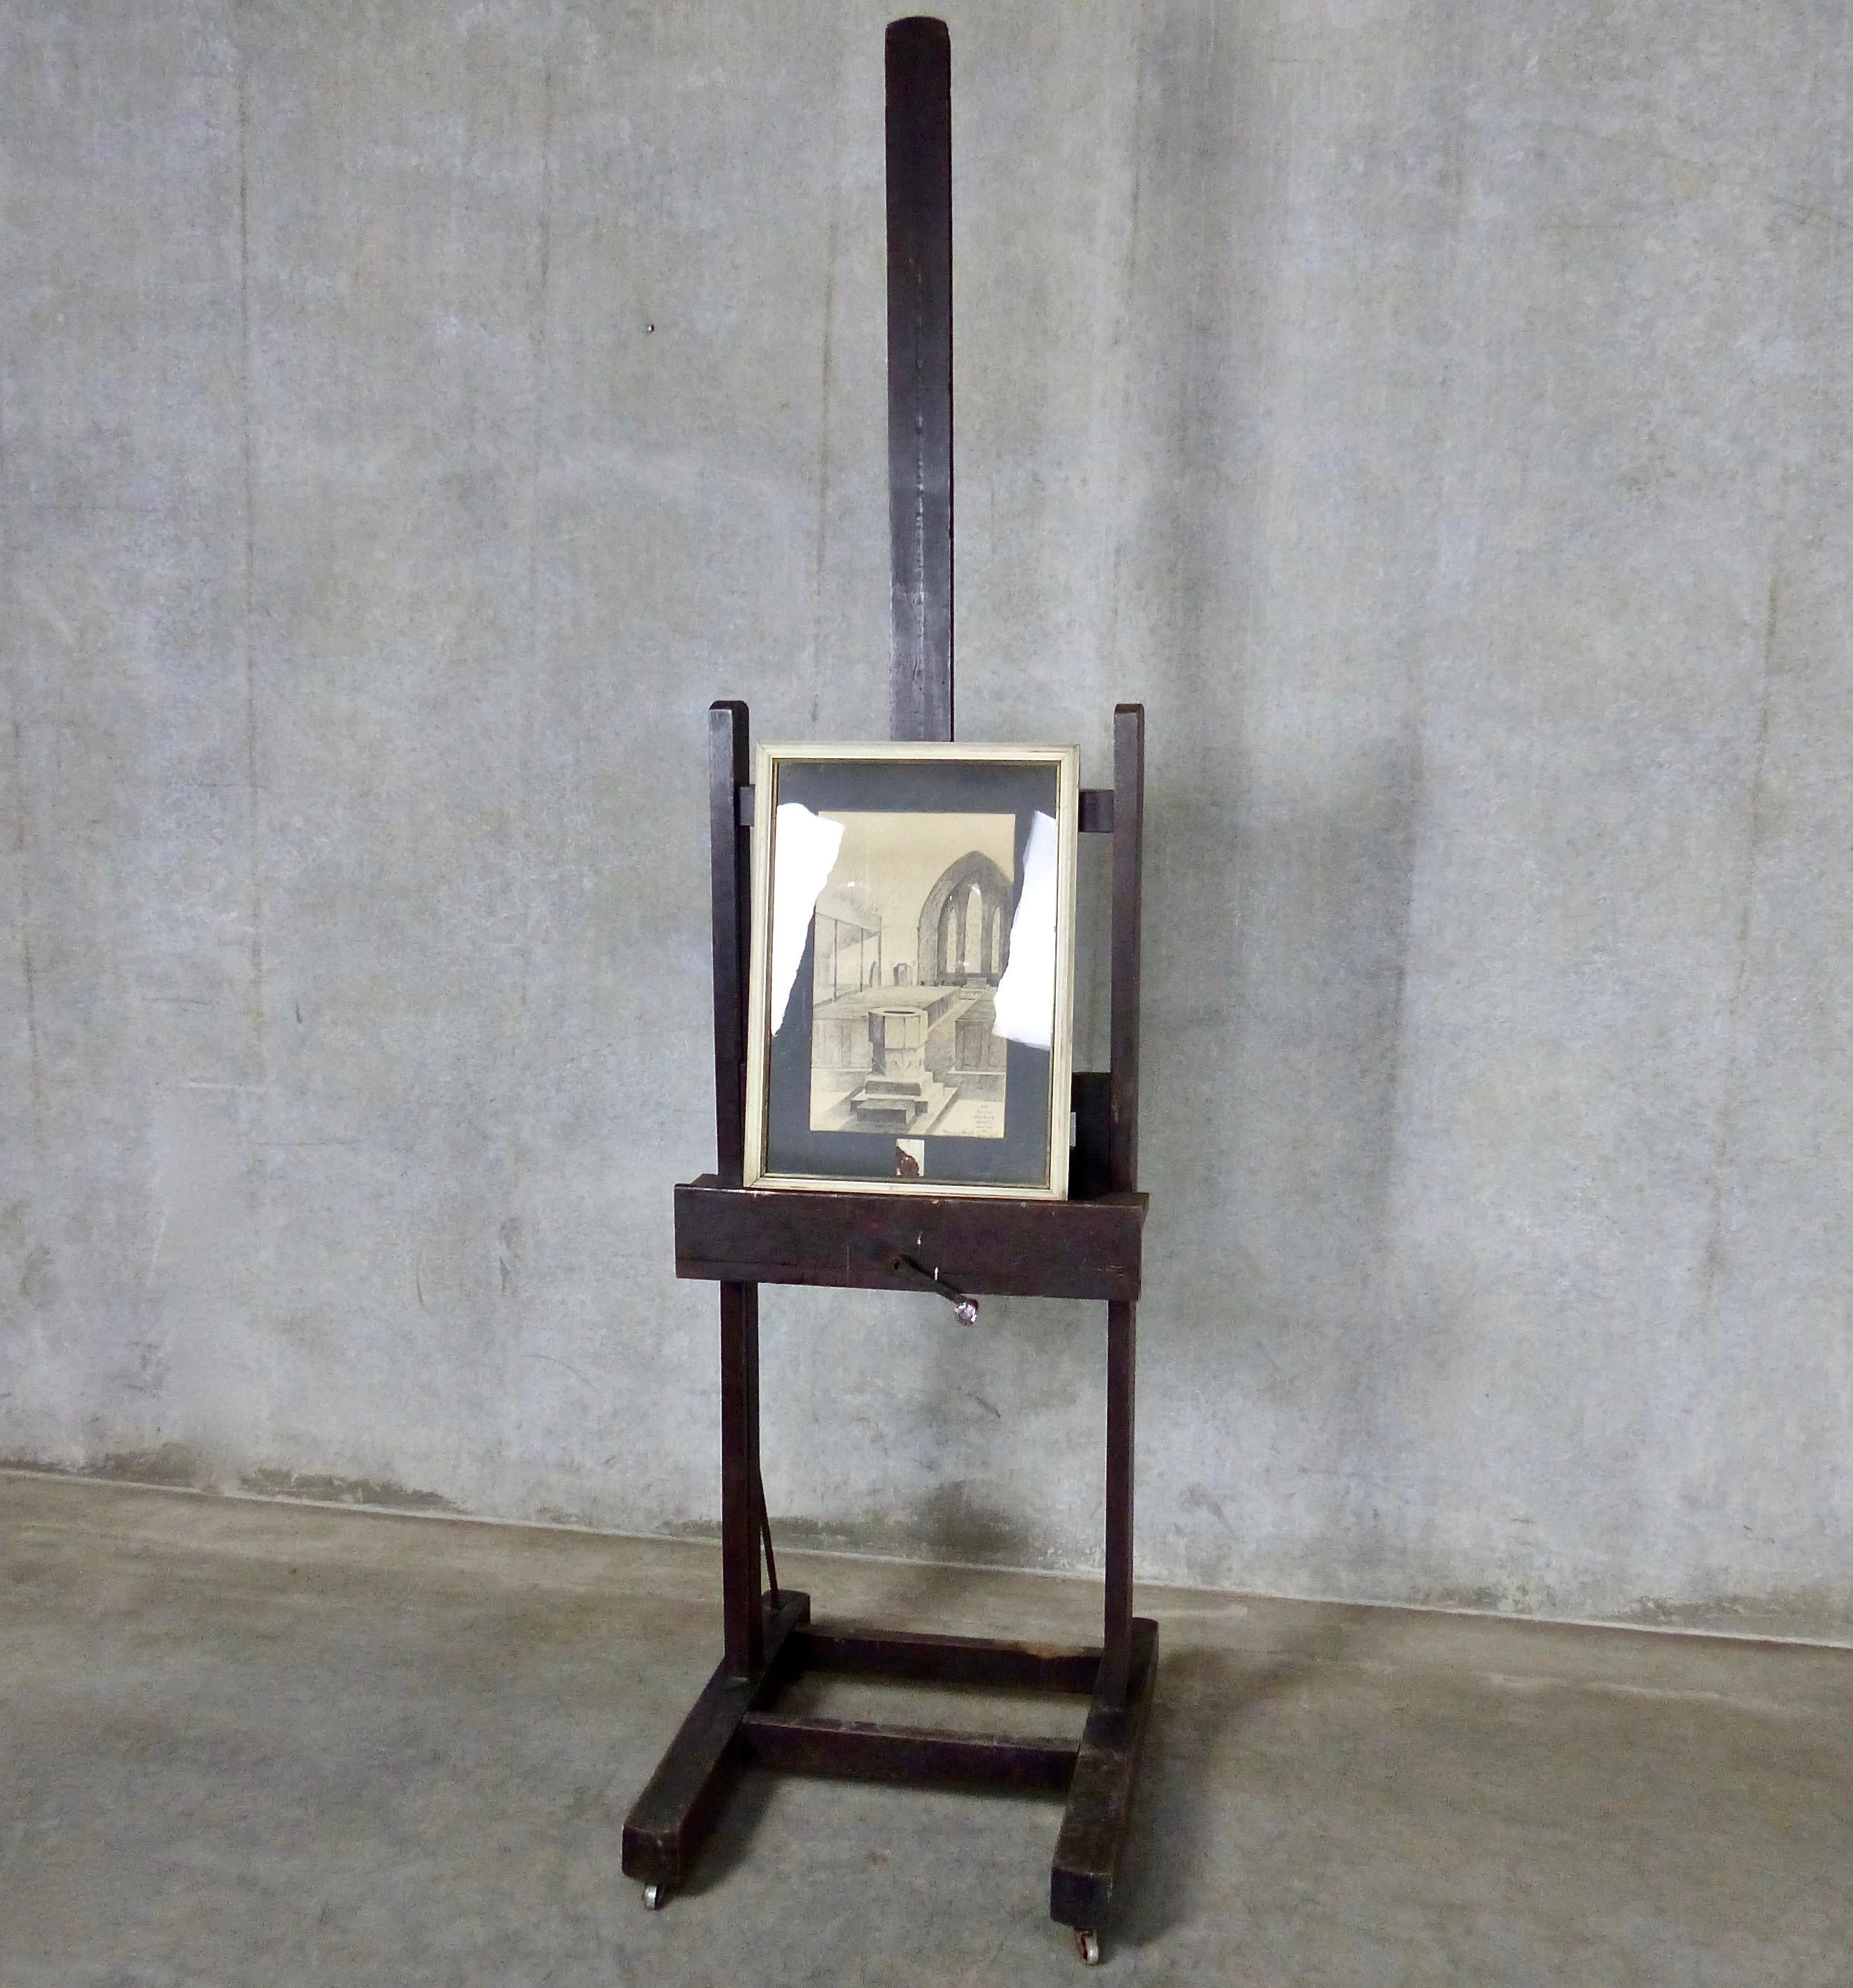 A freestanding, large artist’s easel on wheels, circa 1900, France. Original finish on solid walnut so very sturdy. Fully adjustable with a hand crank; some brass hardware. Display your best painting, or less conventionally, try a flat screen